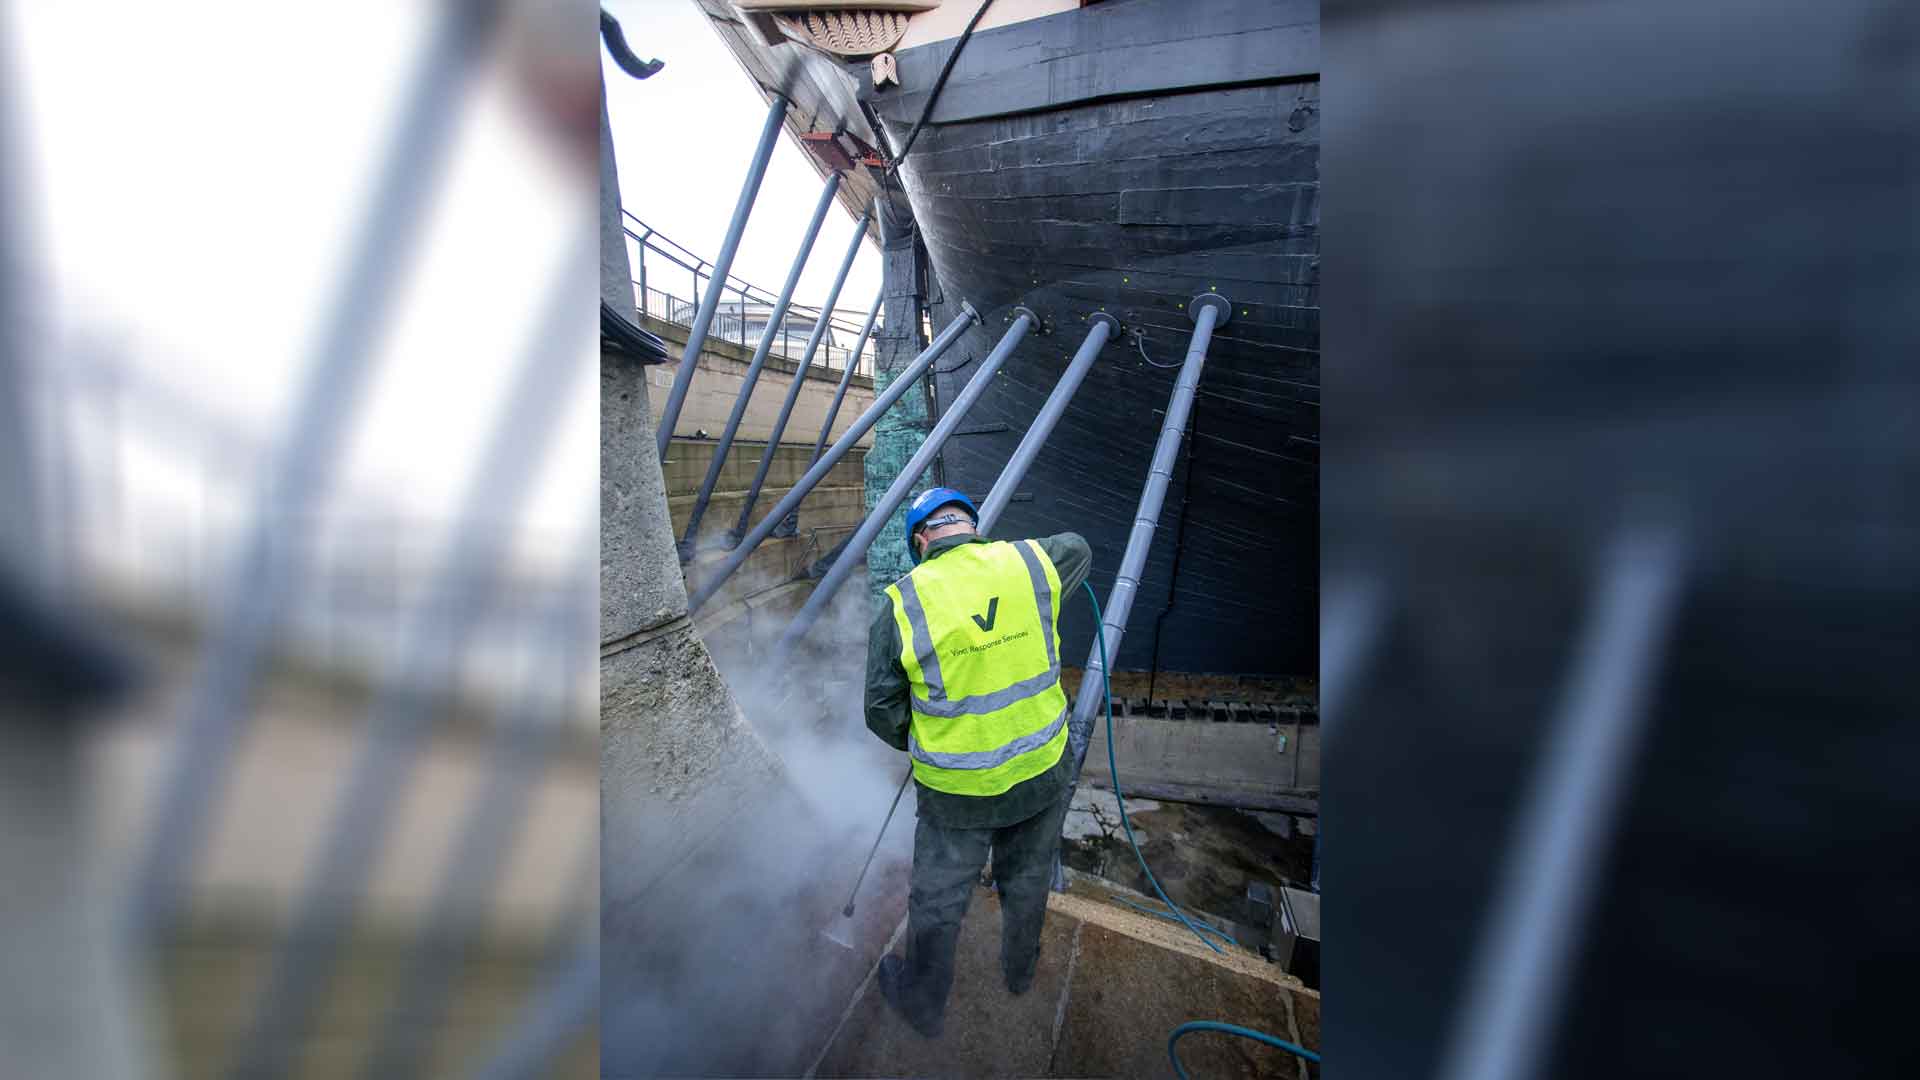 Vinci technicians working to clean the HMS Victory dry dock, at Portsmouth Historic Dockyard.